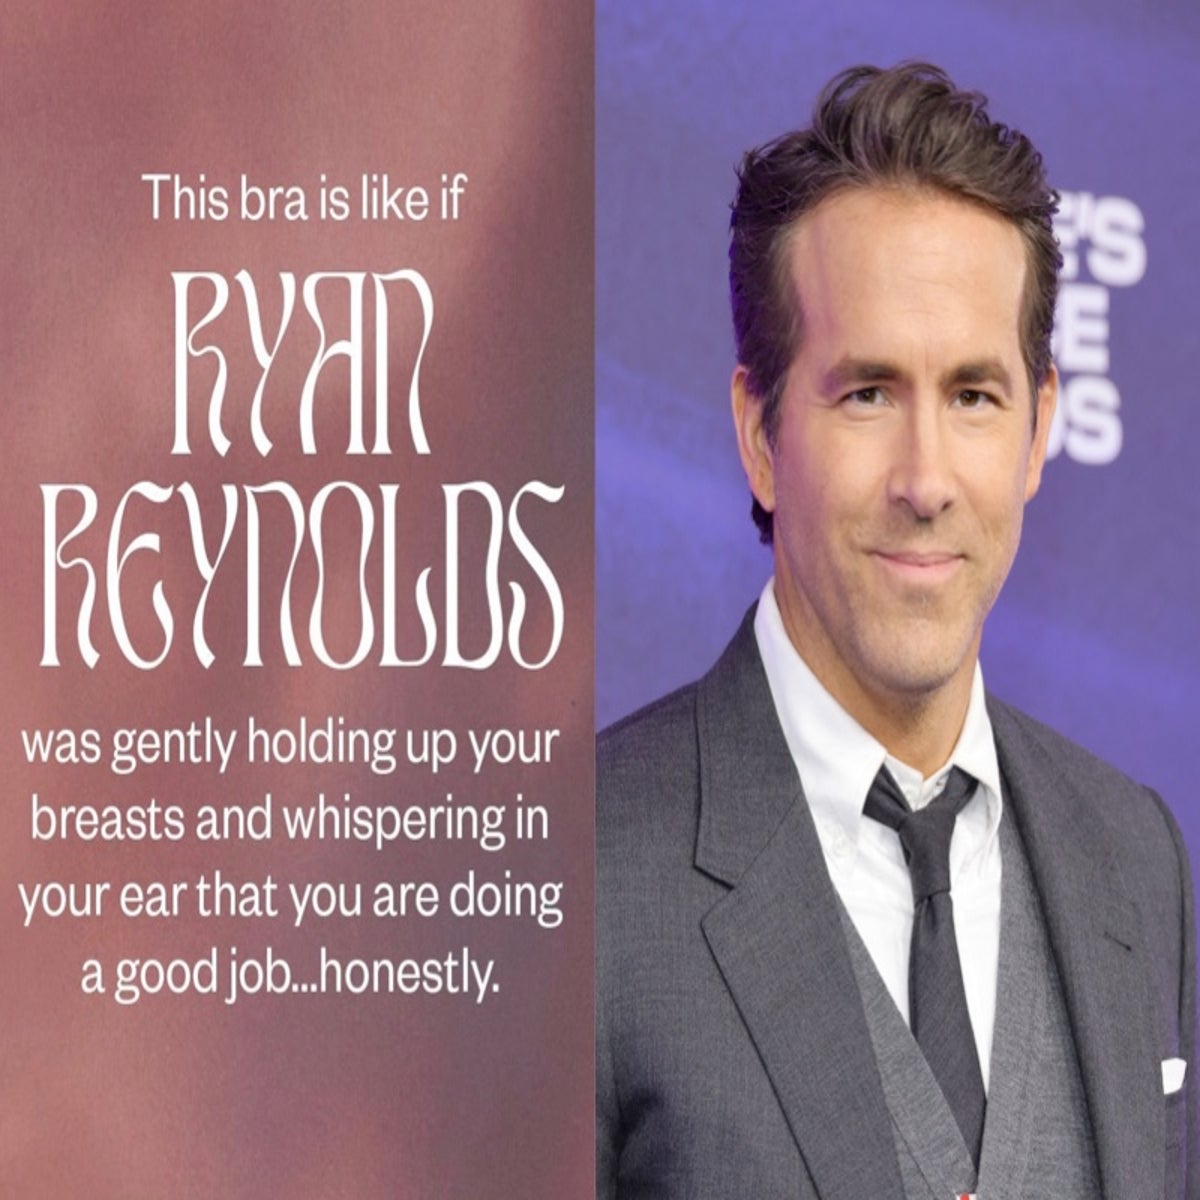 Lingerie Brand Apologizes for 'Creepy' Ad Featuring Ryan Reynolds